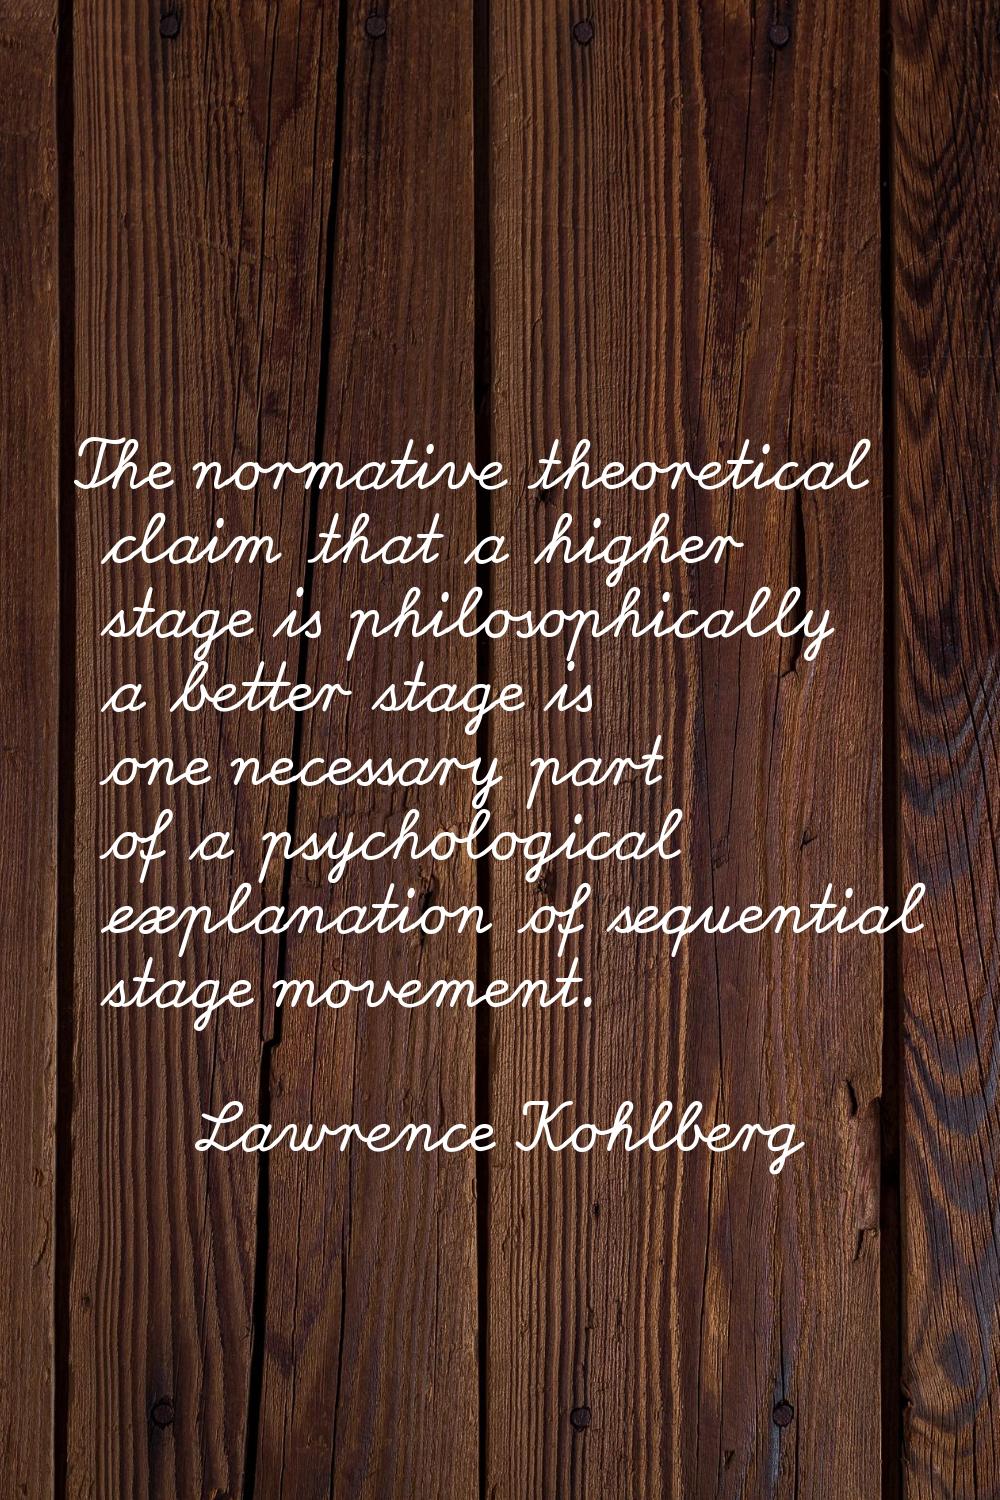 The normative theoretical claim that a higher stage is philosophically a better stage is one necess